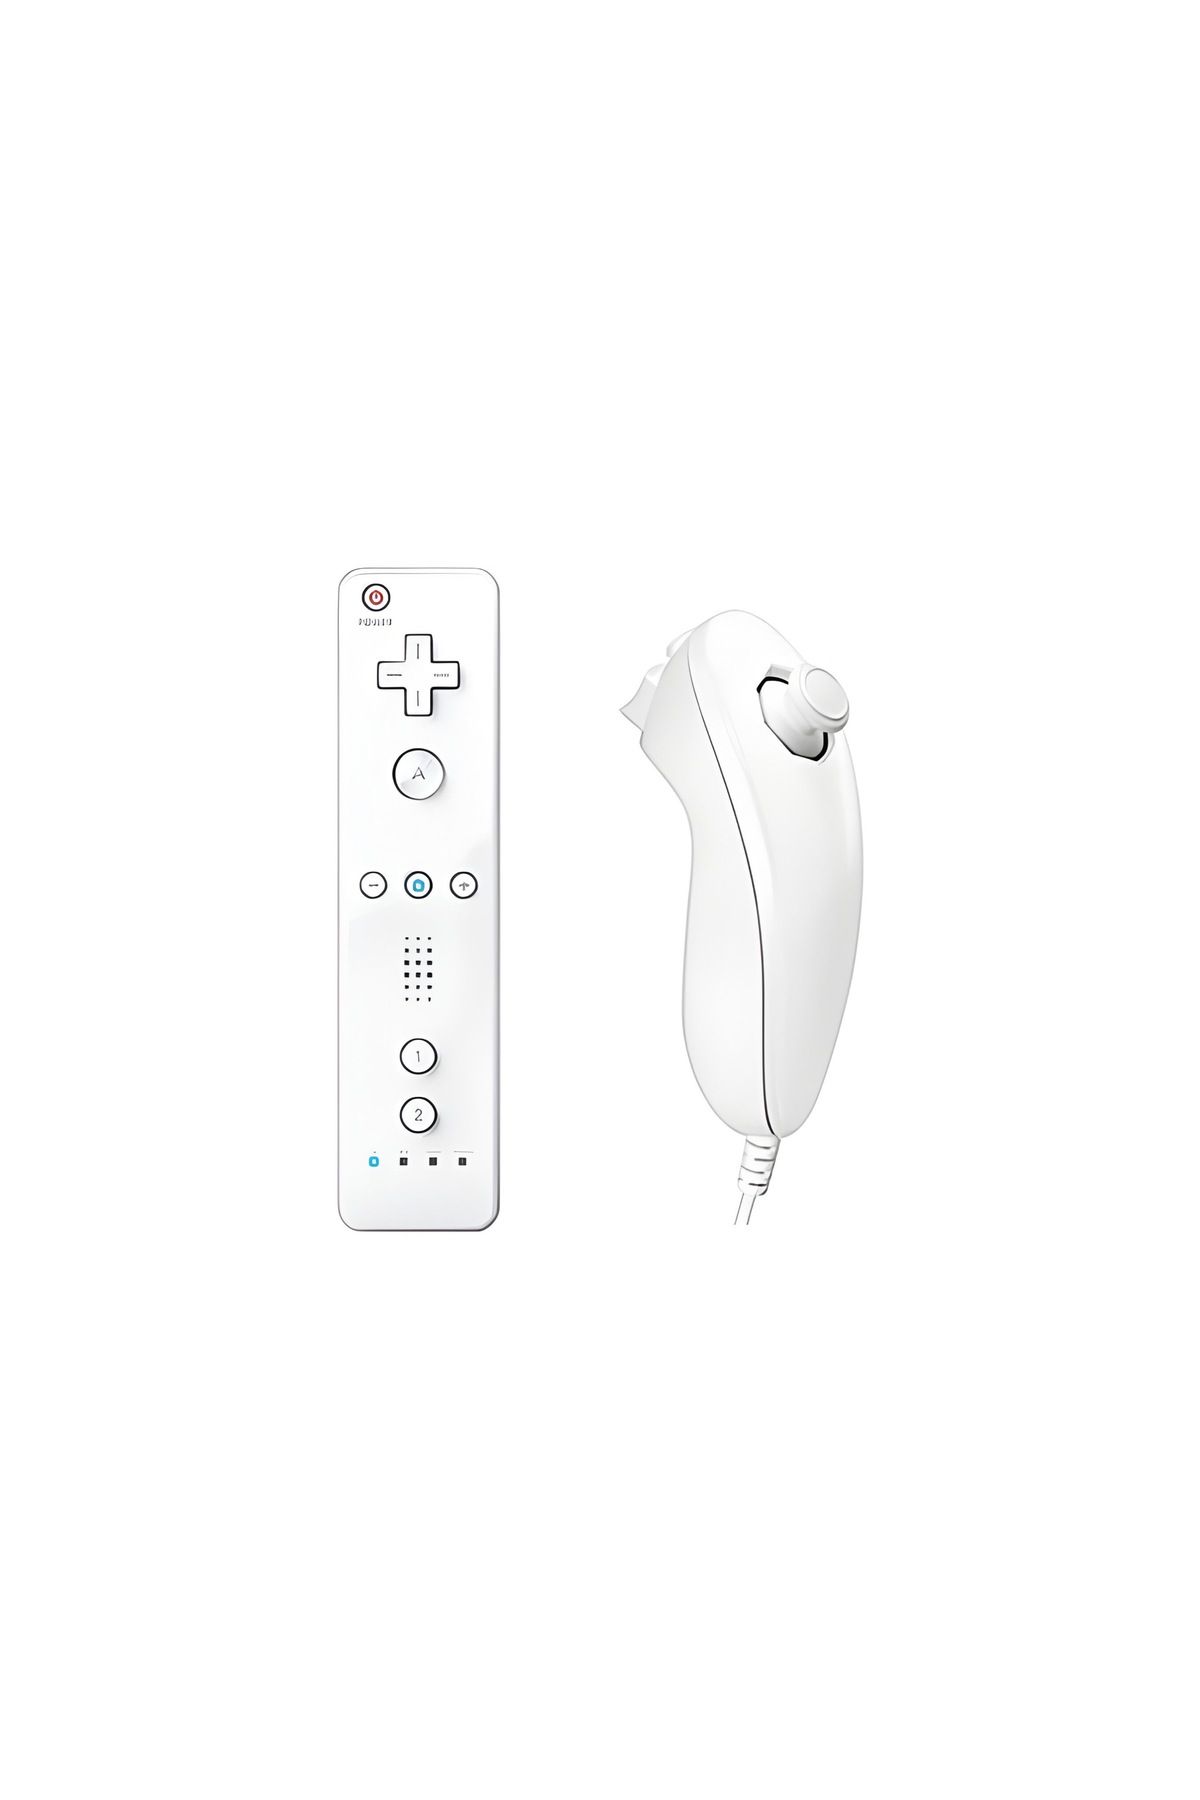 YUES Wii Remote Nunchuck Controller Motion Plus